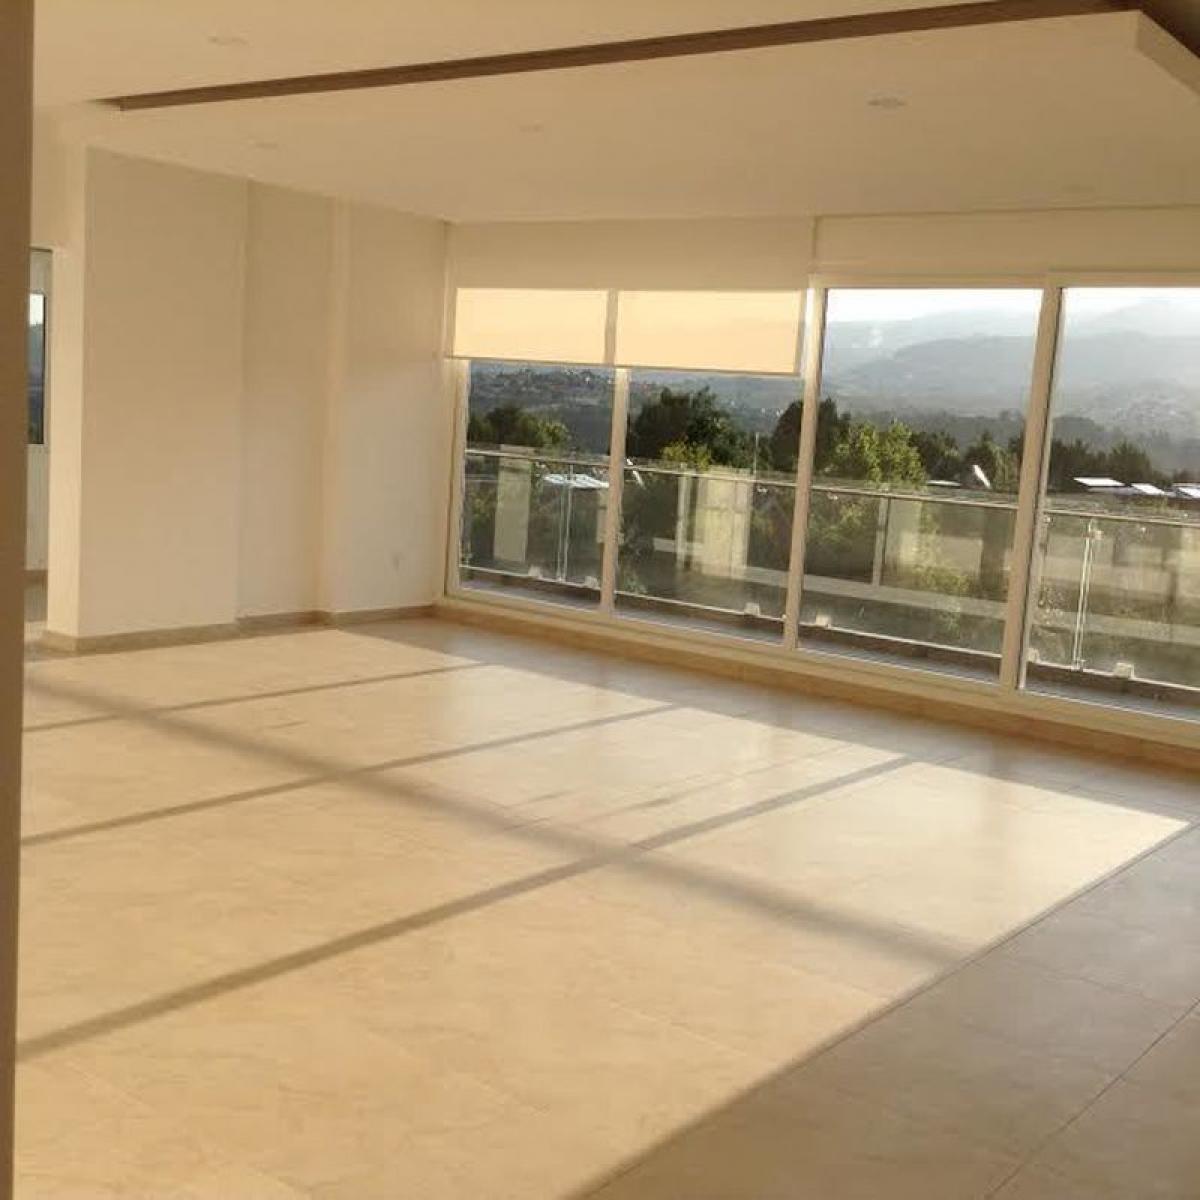 Picture of Apartment For Sale in Huixquilucan, Mexico, Mexico